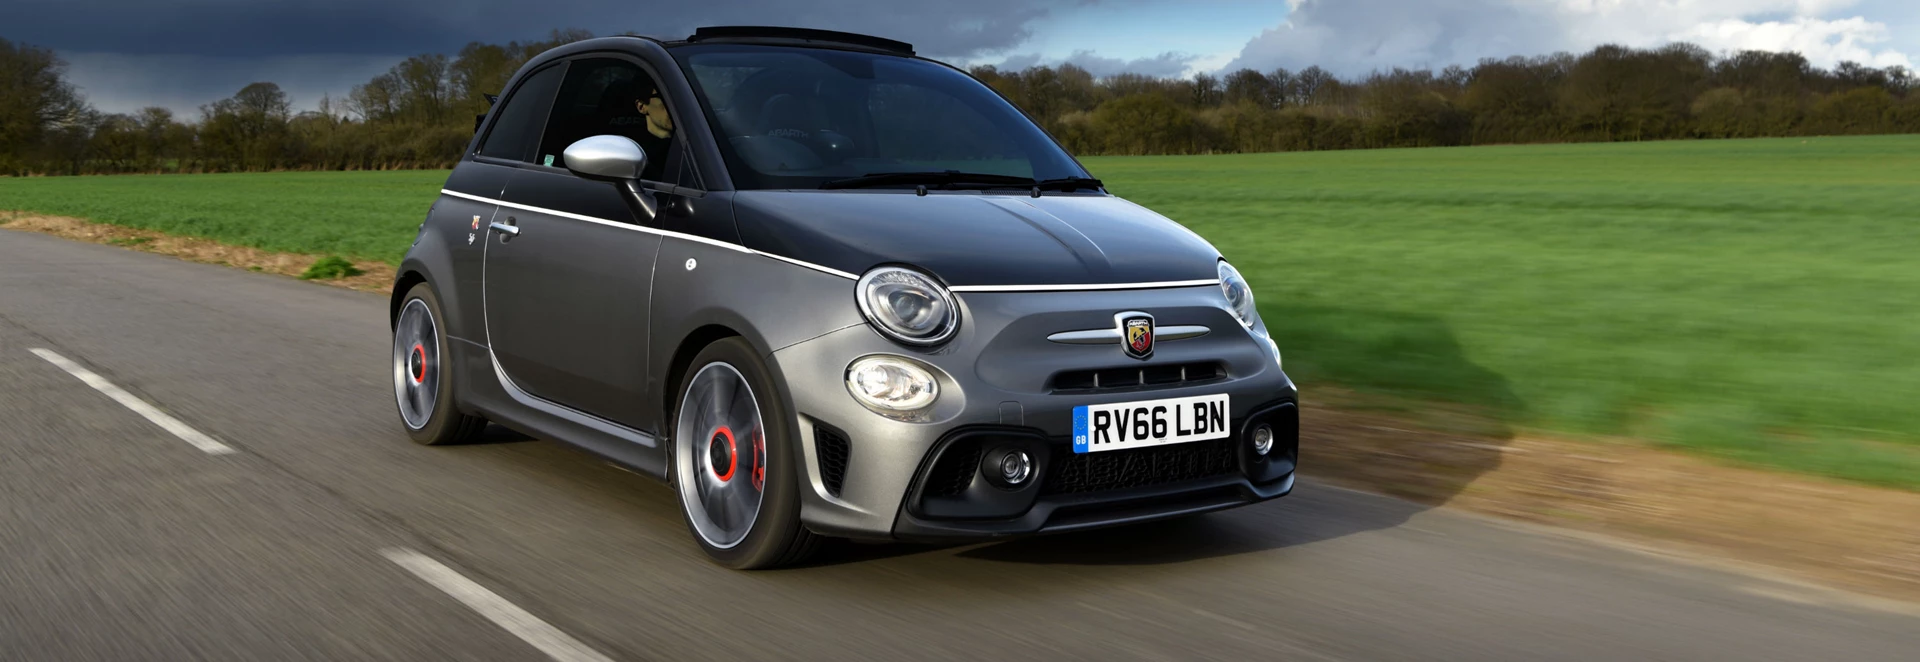 Abarth 595C Turismo Convertible 2017 Review 